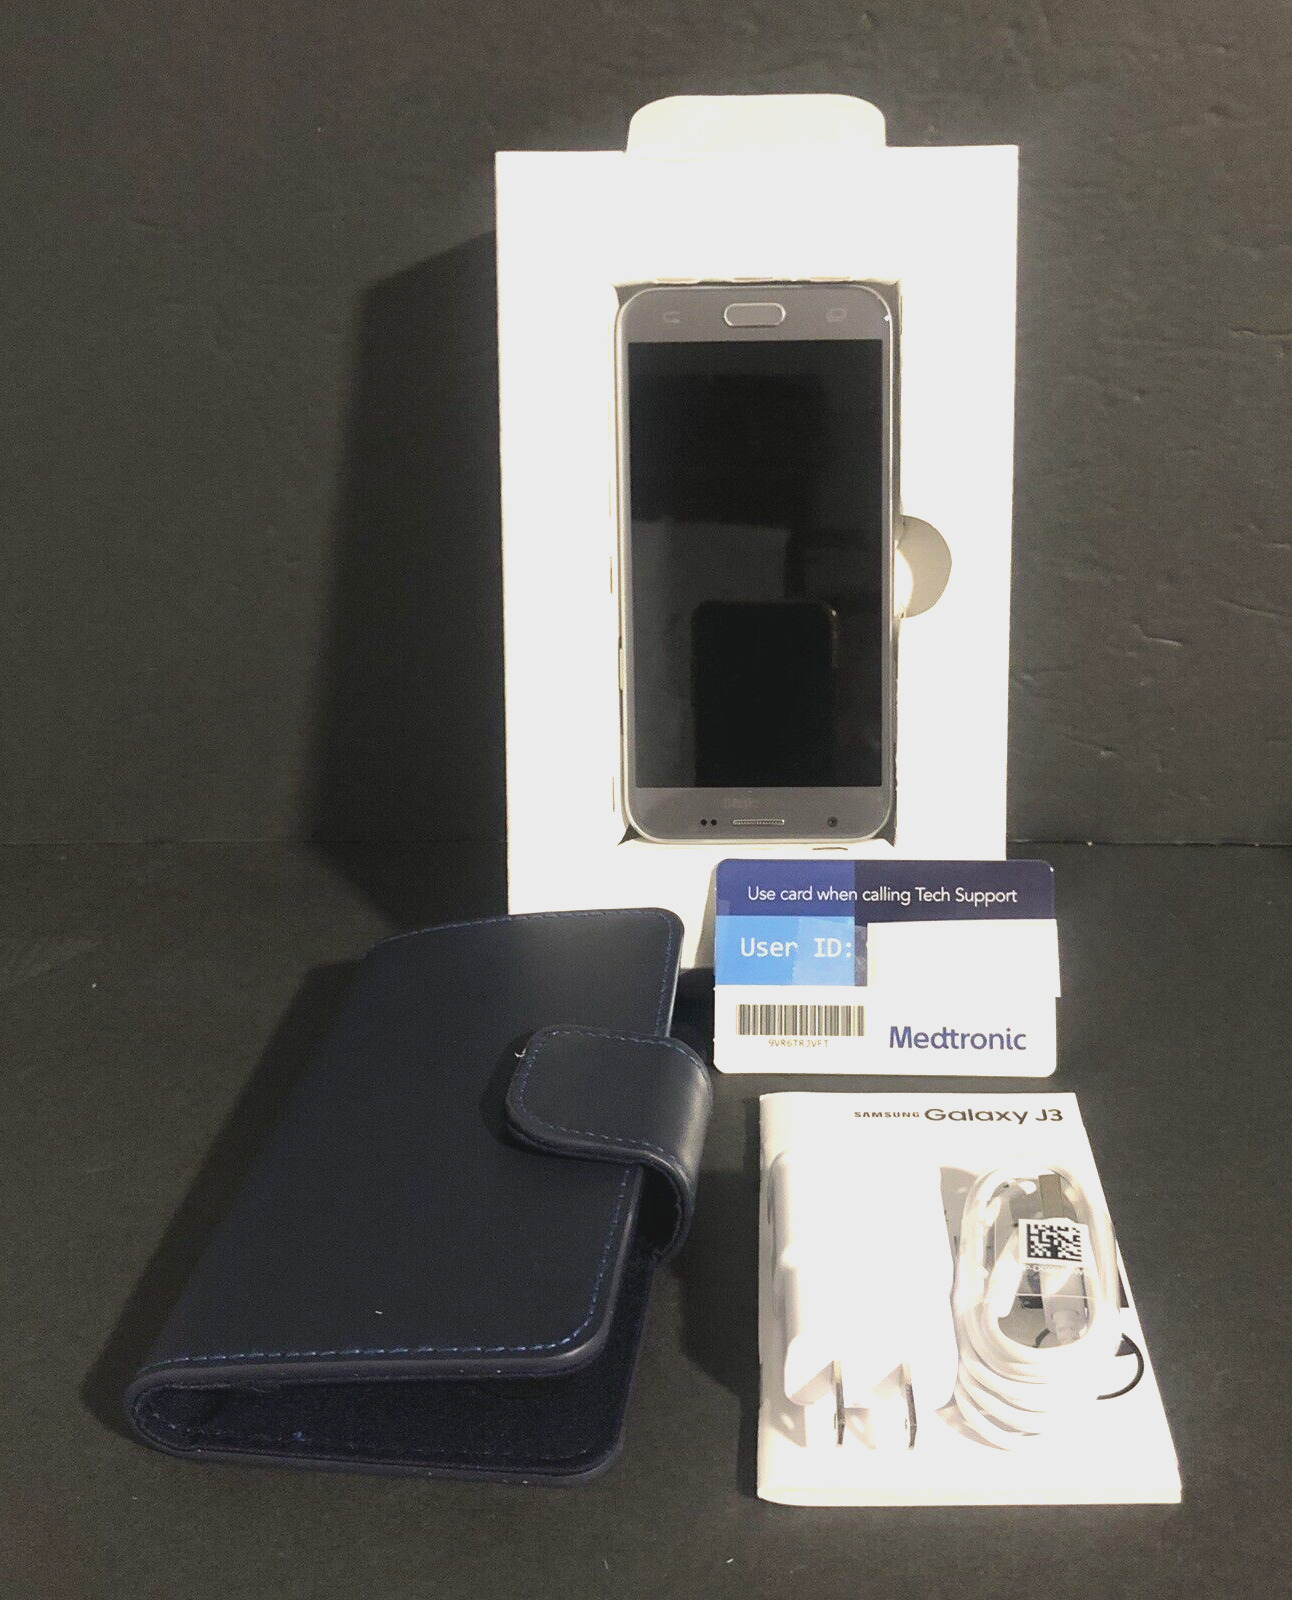 Medtronic Samsung Galaxy J3 with Case, Charger, and Guide ONLY ~ Never Used